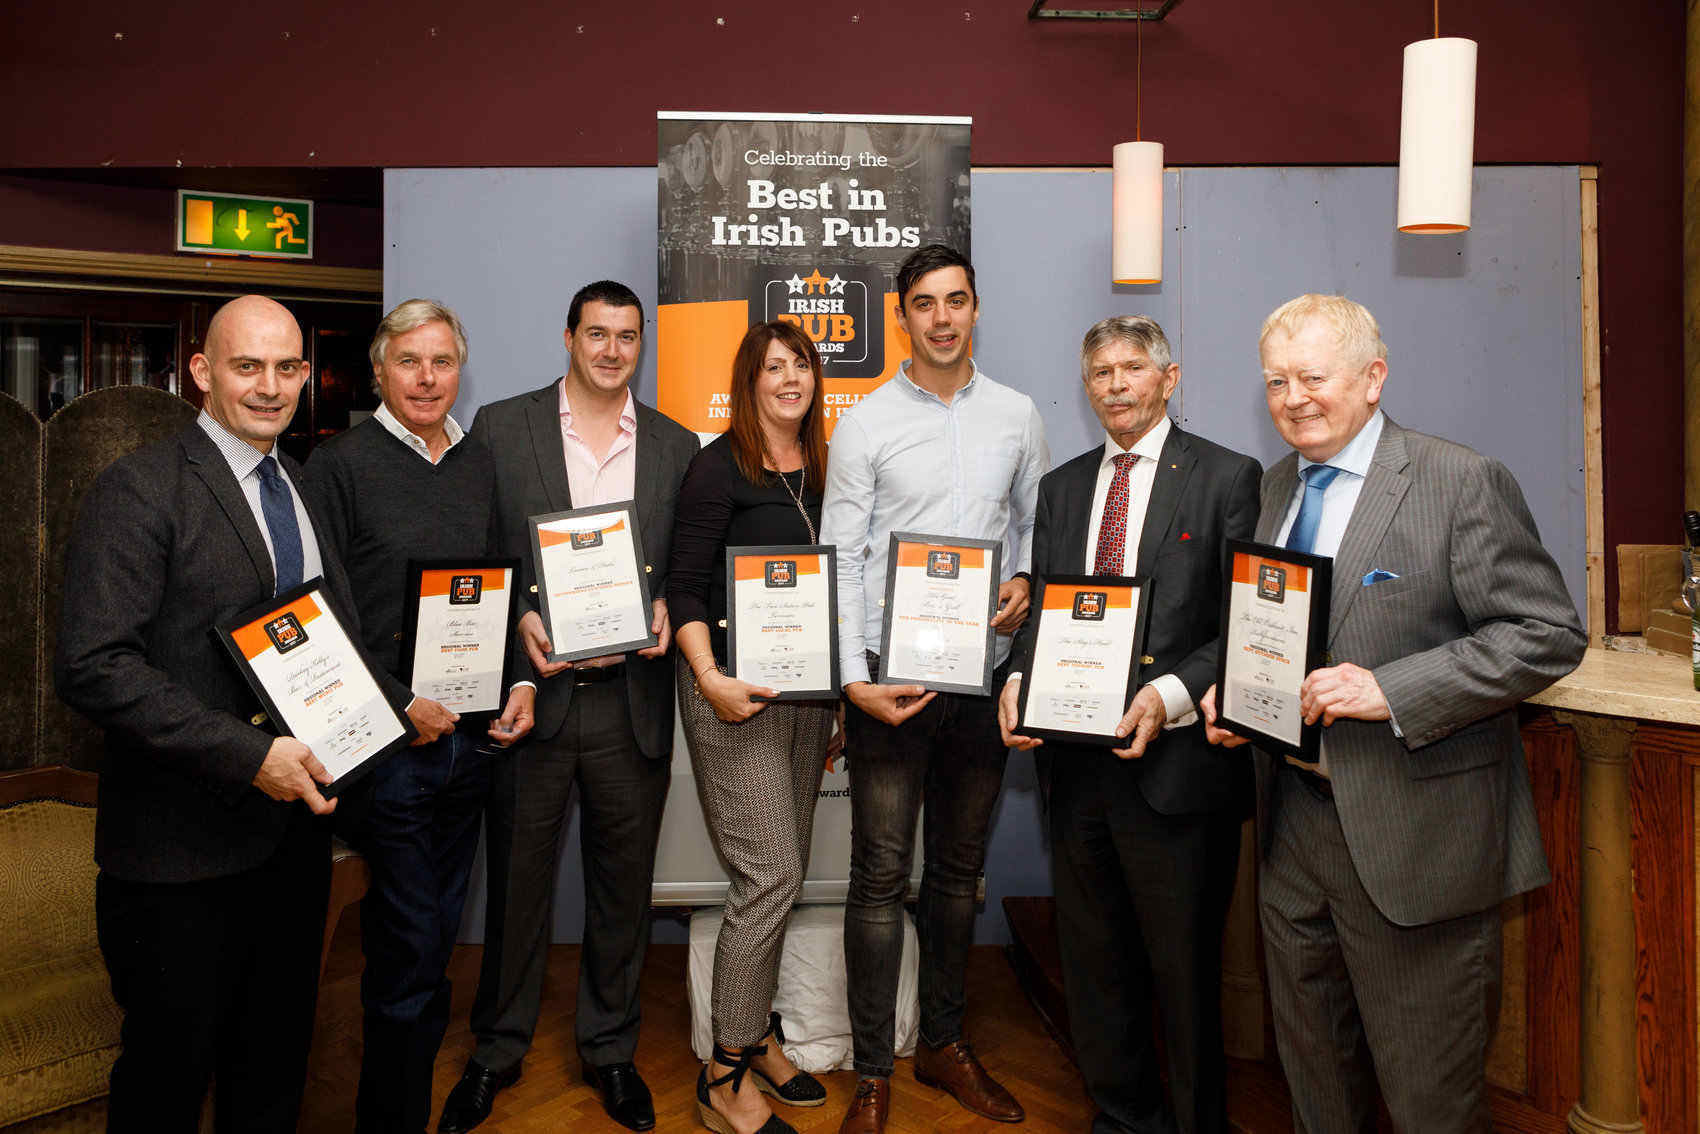 Some of Dublin’s Regional Award Winners (from left): Darky Kelly’s Nathan Towey, Blue Bar’s John Nealon, Lemon & Duke’s Noel Anderson, Two Sisters' Deirdre and Brian Devitt, The Stag’s Head’s Louis Fitzgerald and The Old Orchard’s Charlie Chawke.